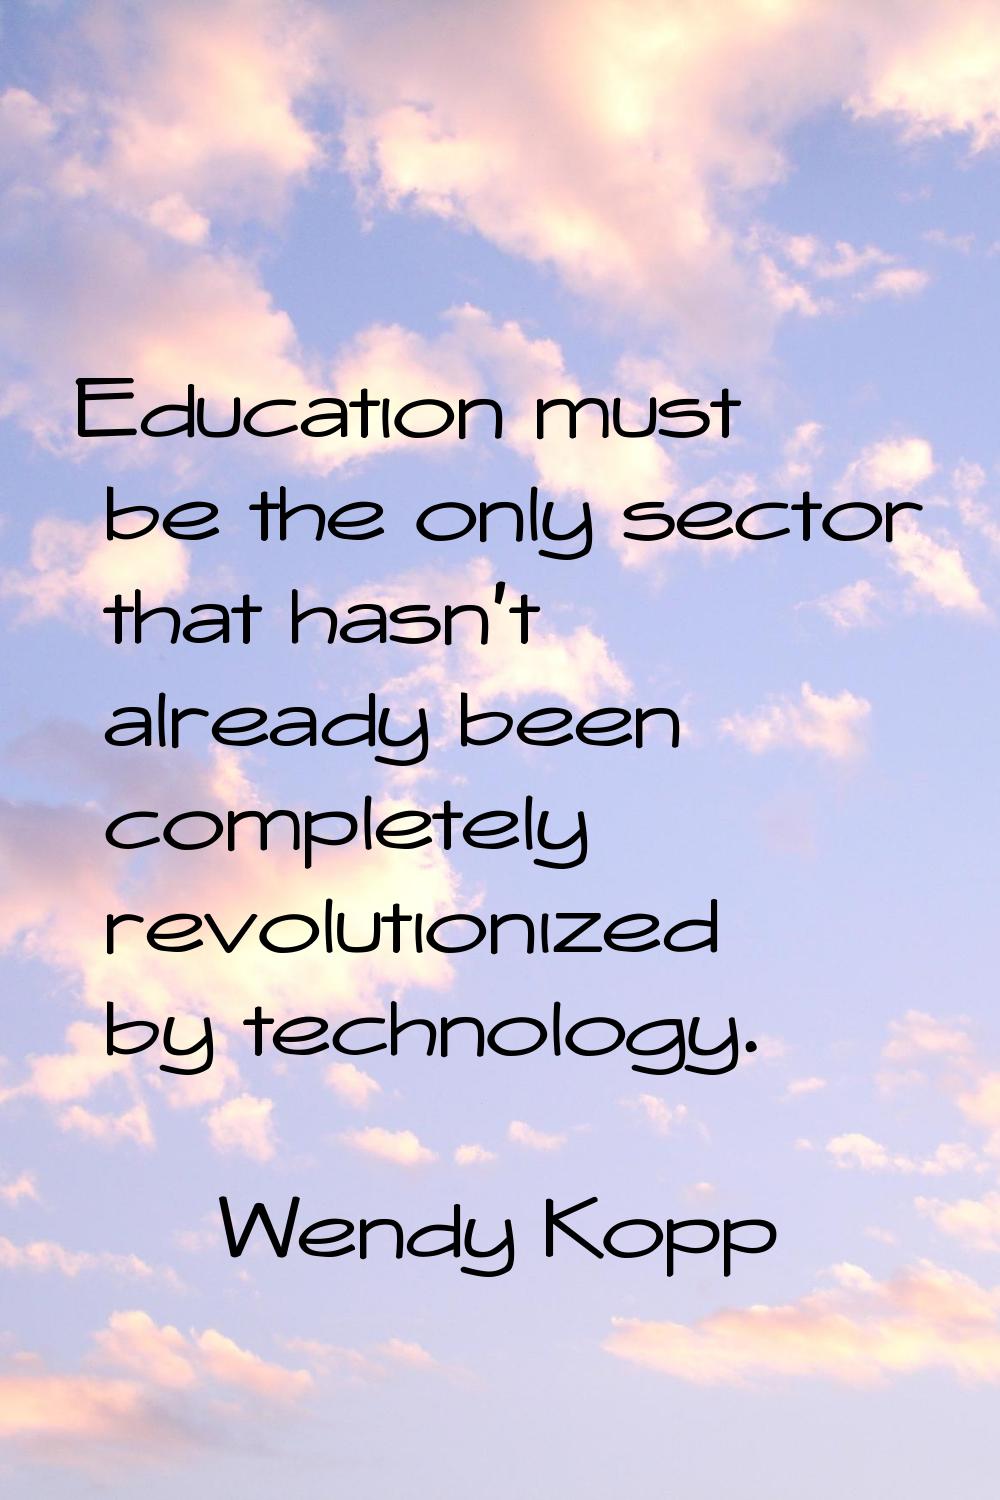 Education must be the only sector that hasn't already been completely revolutionized by technology.